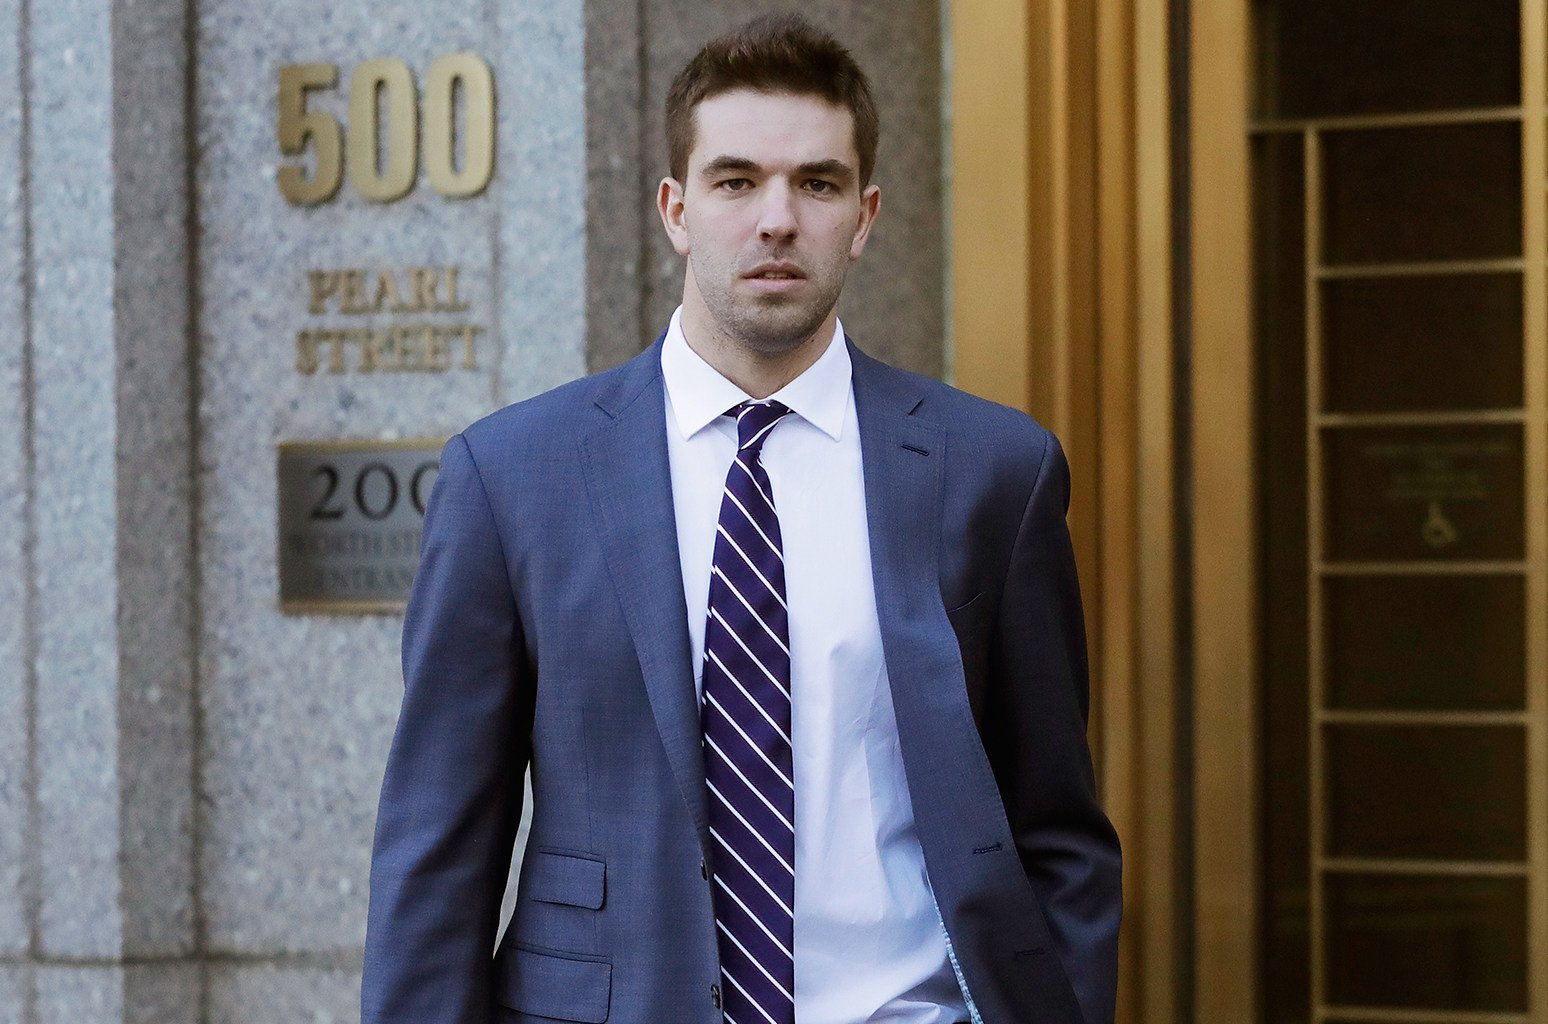 Billy McFarland, promoter of the failed Fyre Festival in the Bahamas, leaves court after pleading guilty to fraud charges, March 6, 2018, in New York. Photo: @DuffaBoiii/X